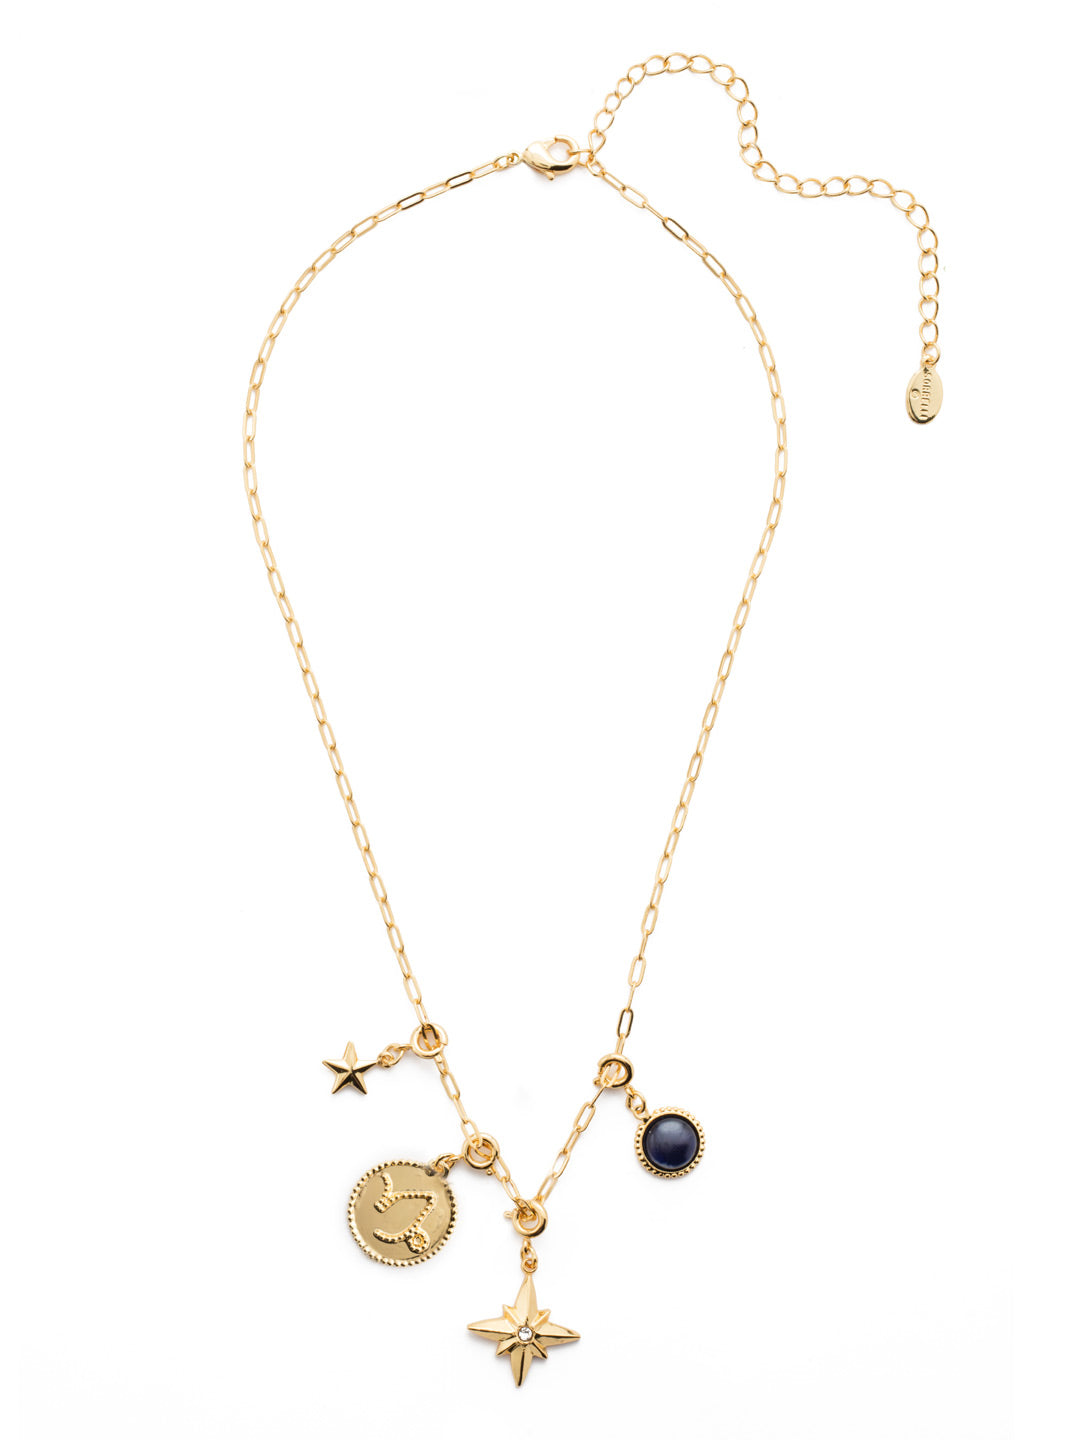 Capricorn Charm - 4CEU1BGMTL - <p>What's you sign? Celebrate your astrological sign Capricorn with one of these beautiful medallion like charms. Each charm can be easily attached to one of our favorite Sorelli chain necklaces. From Sorrelli's Bare Metallic collection in our Bright Gold-tone finish.</p>